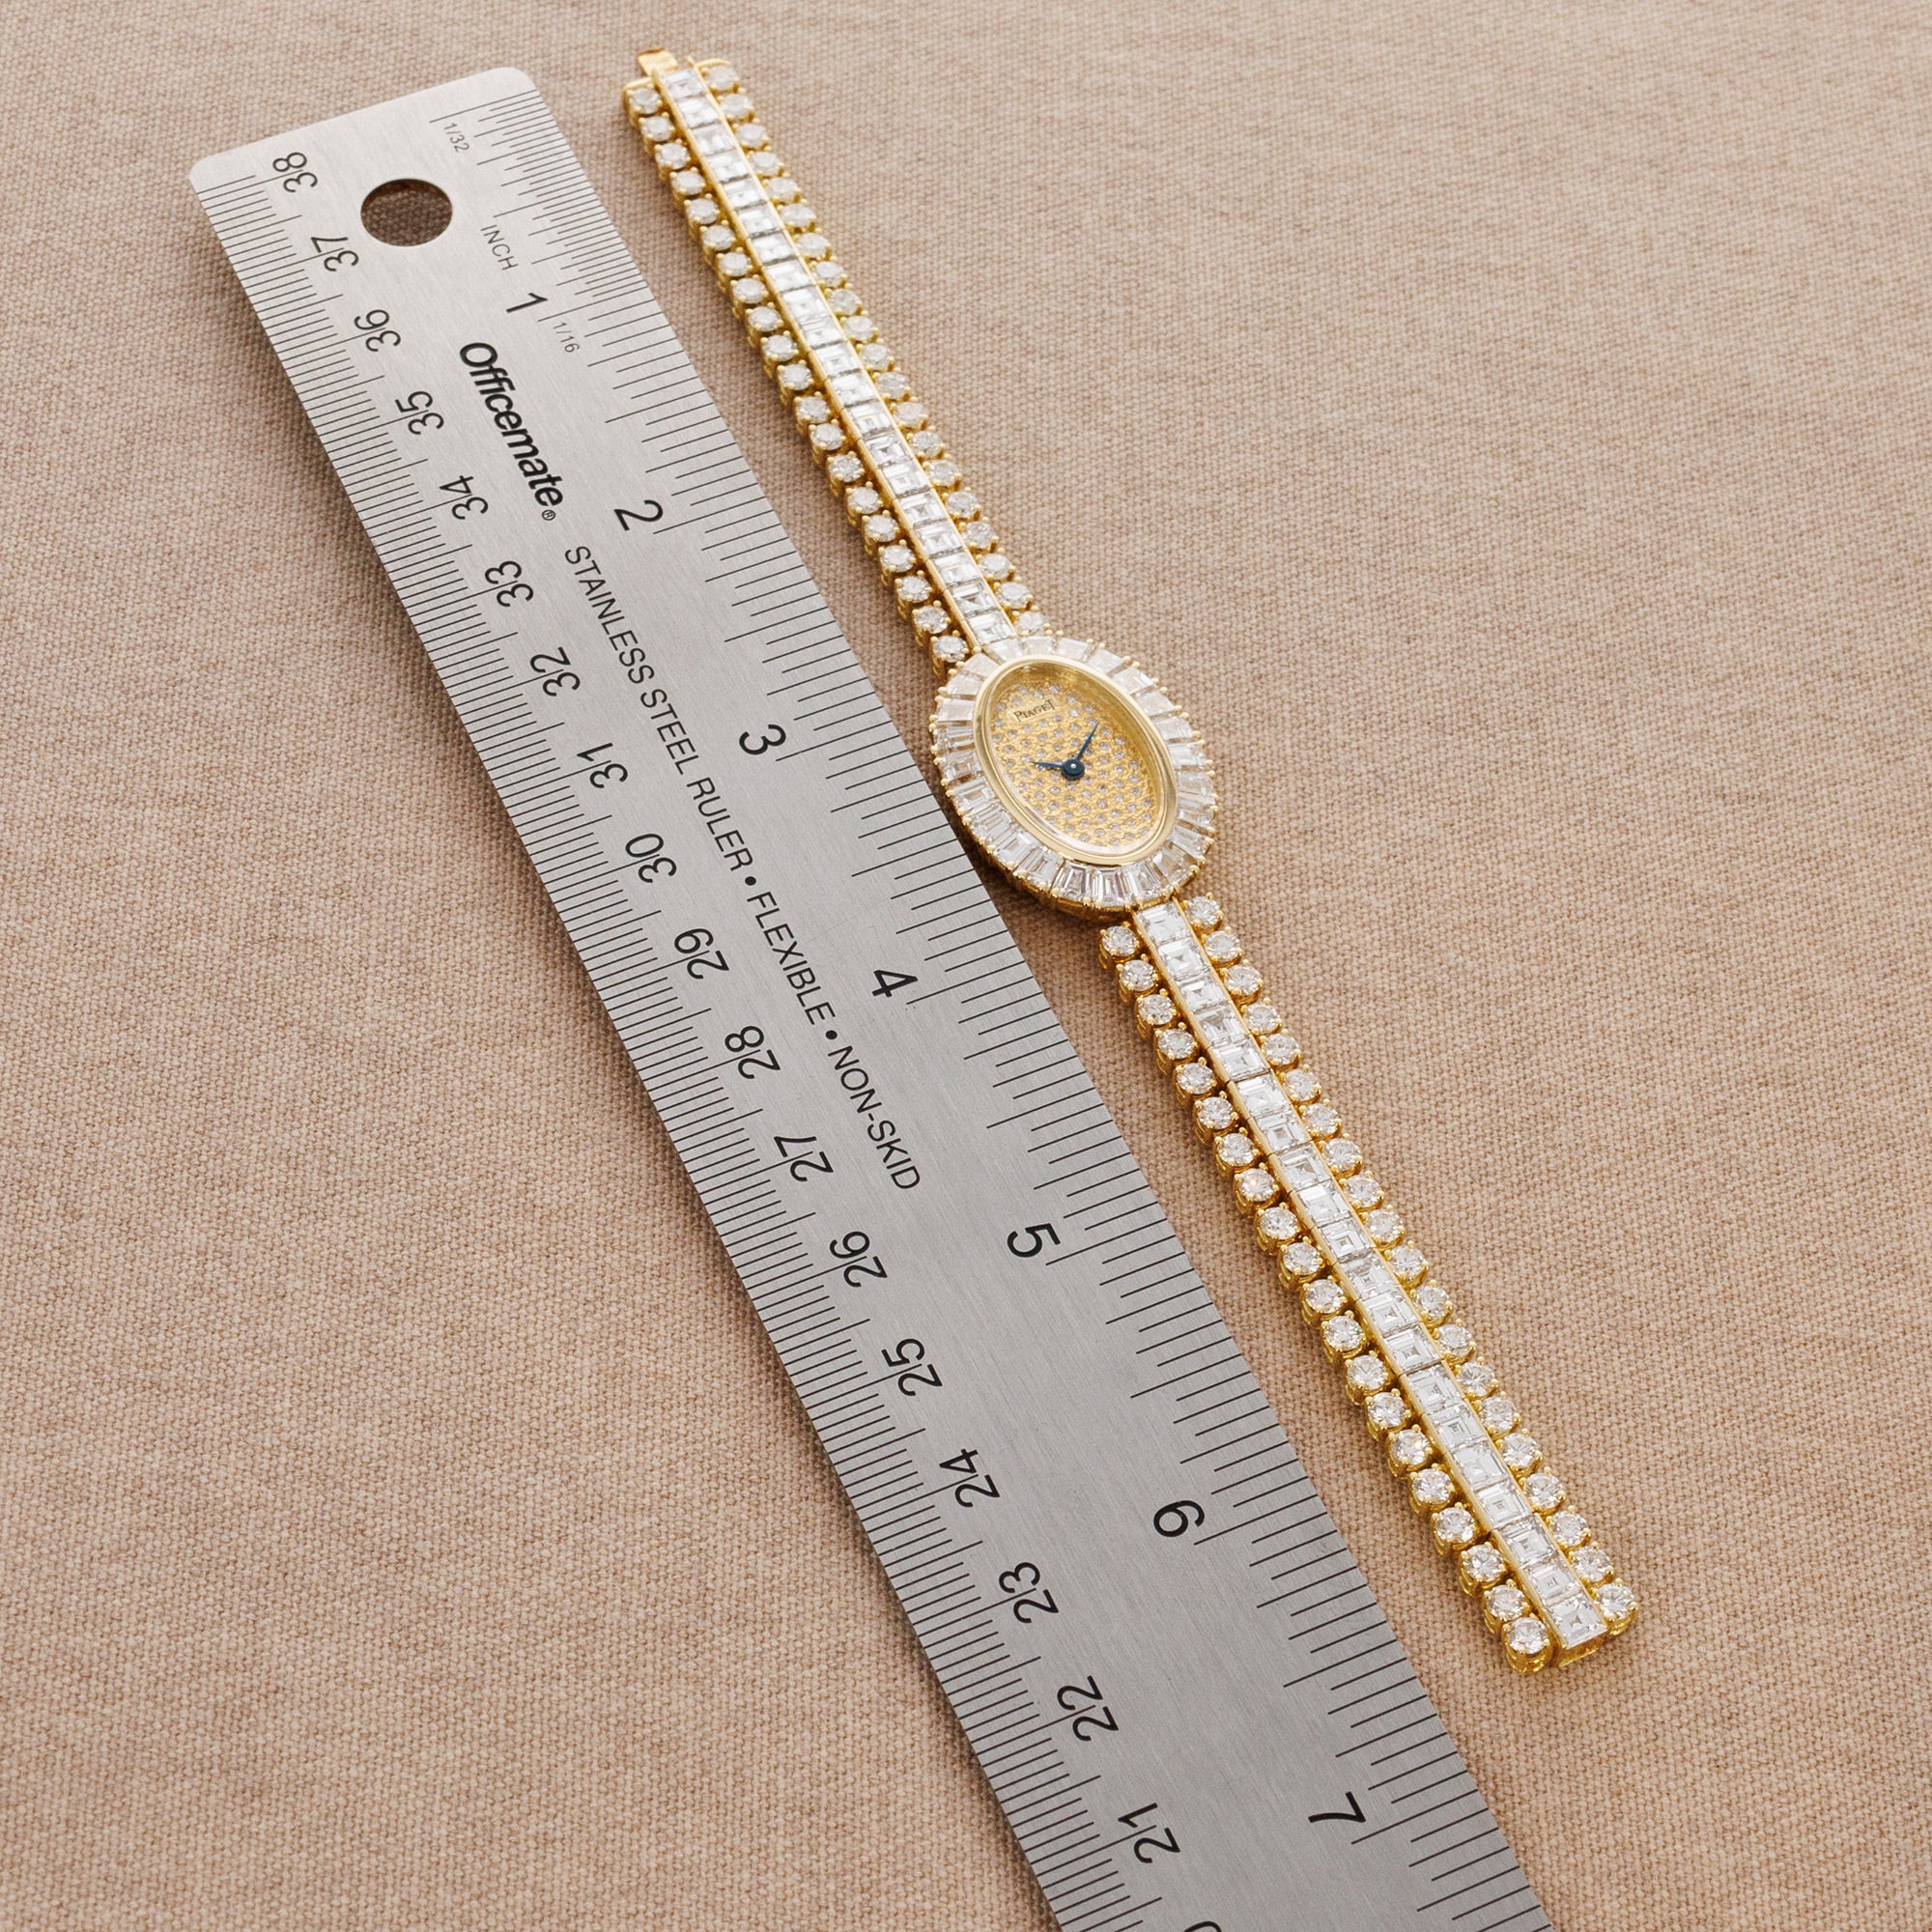 Piaget - Piaget Yellow Gold Baguette Bezel with Pave Dial and Diamonds Bracelet - The Keystone Watches